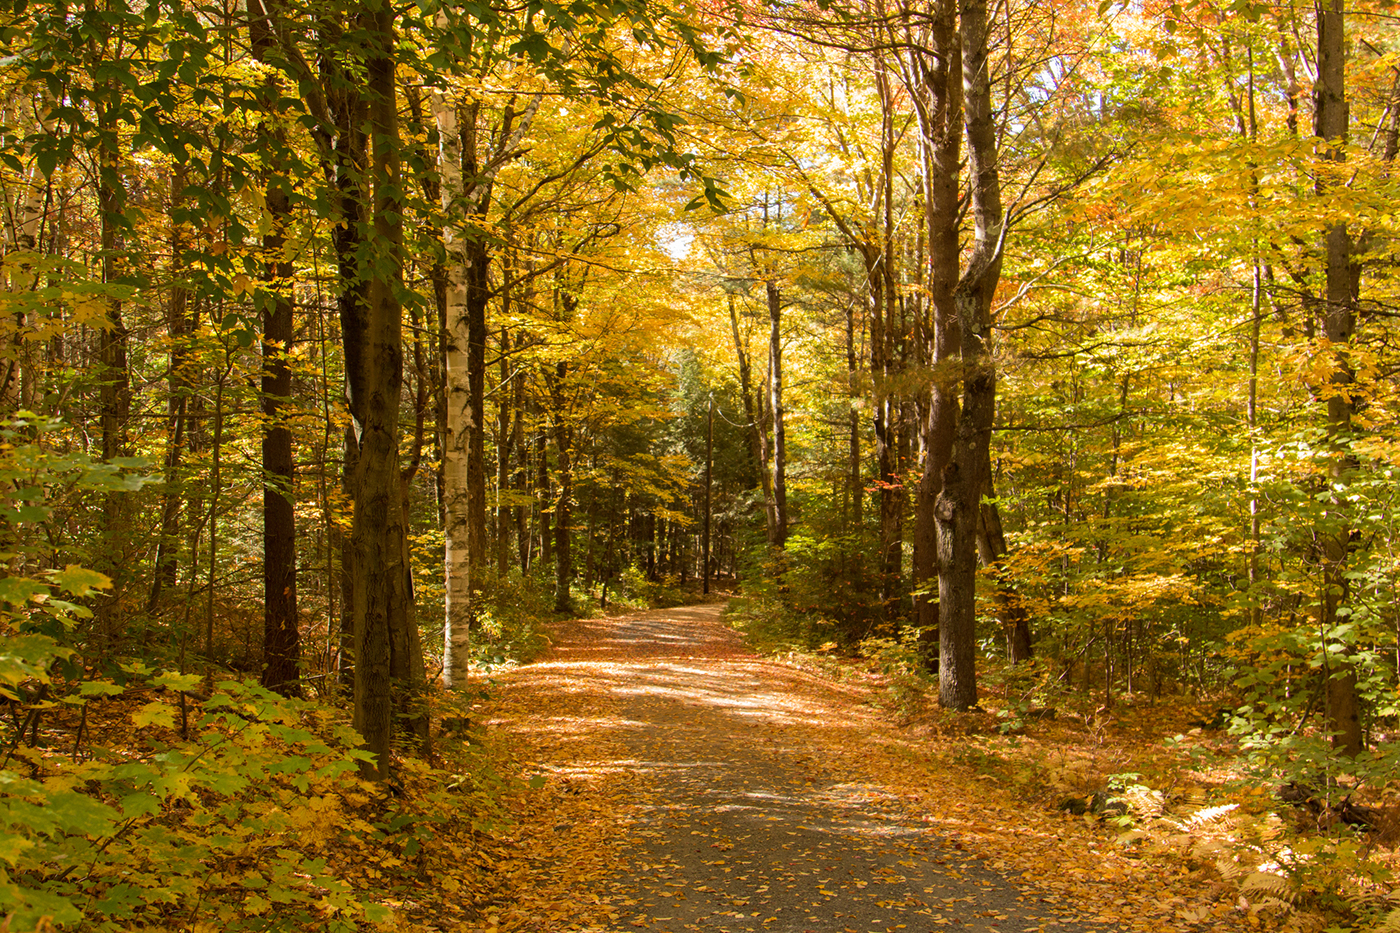 Trail through a forest during fall foliage at High Ledges